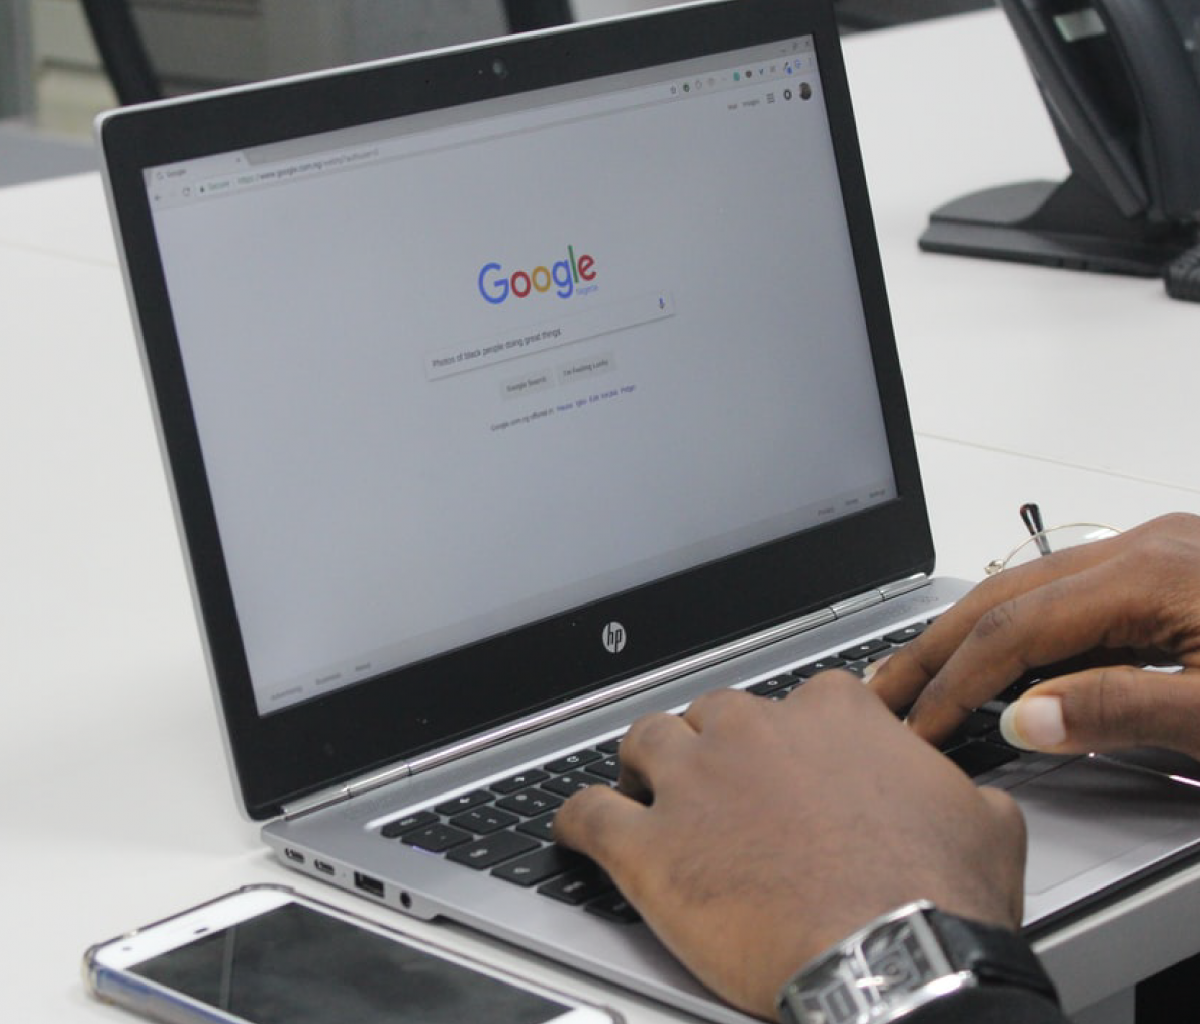 Laptop on desk with persons hands typing on keyboard and "Google" on the screen